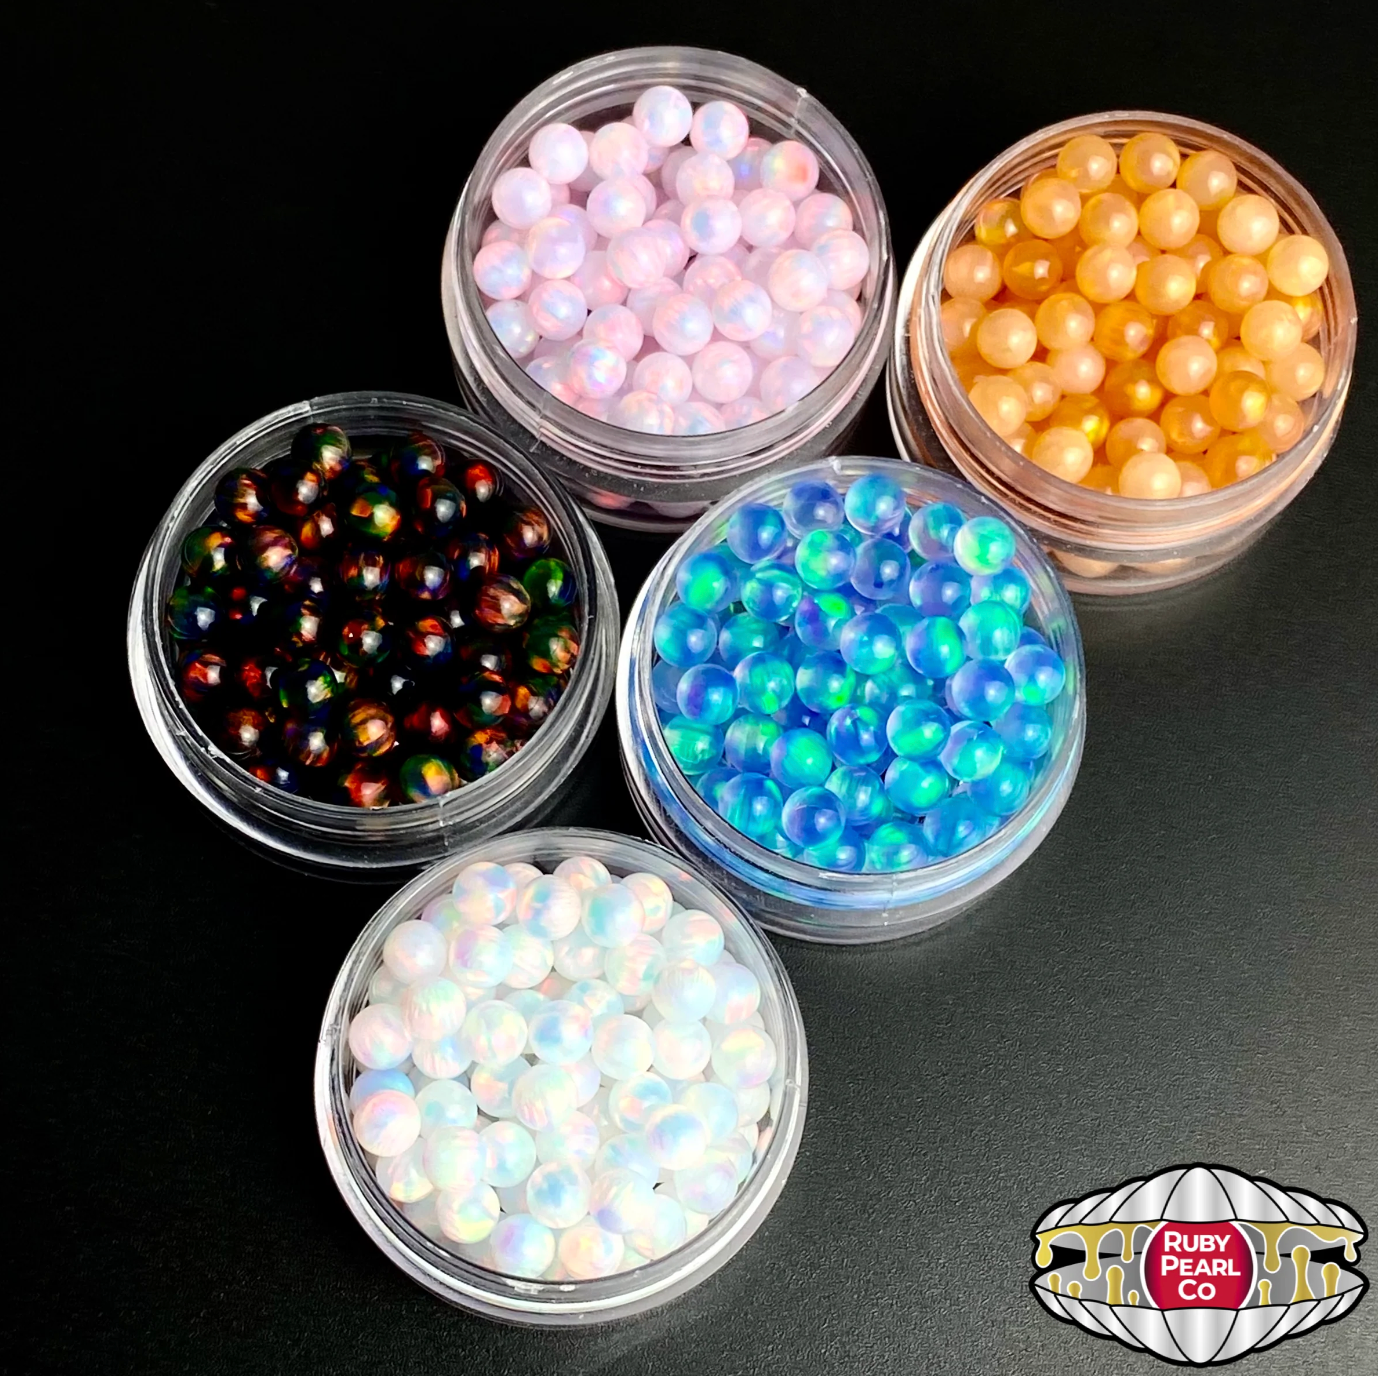 RubyPearl Co Inserts (Pearls / Pills)